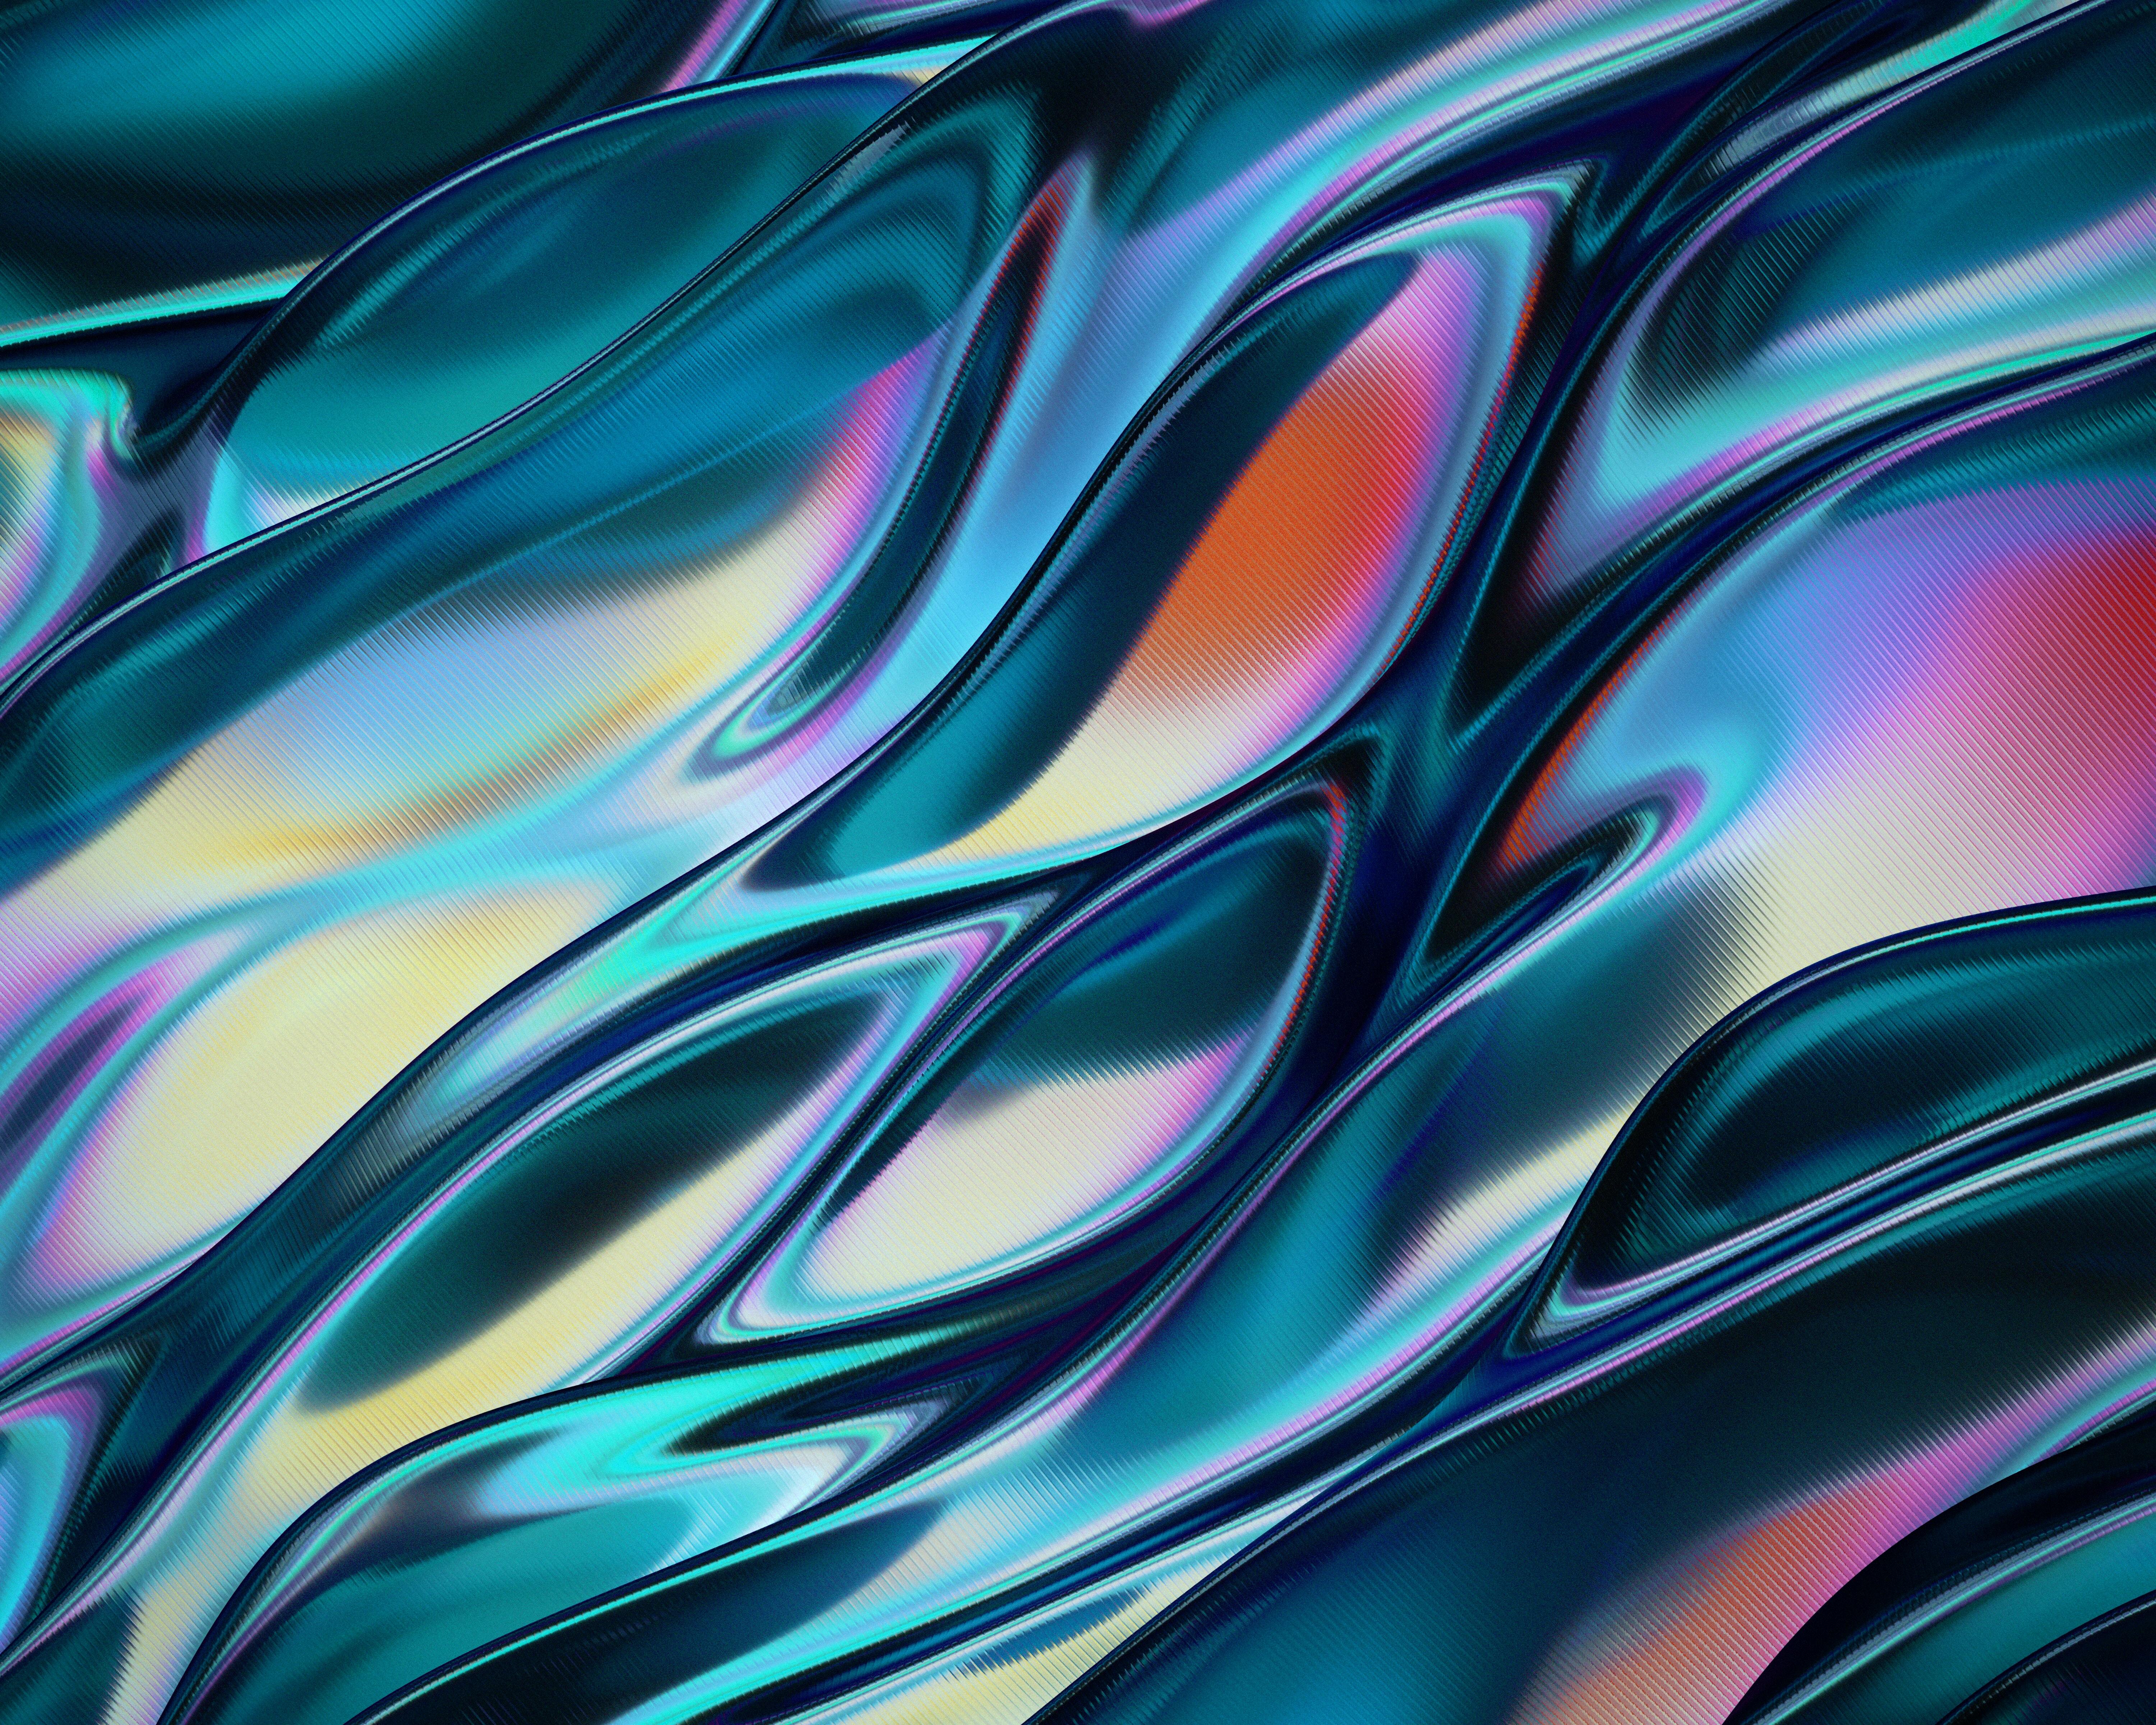 1046248 free wallpaper 800x352 for phone, download images  800x352 for mobile